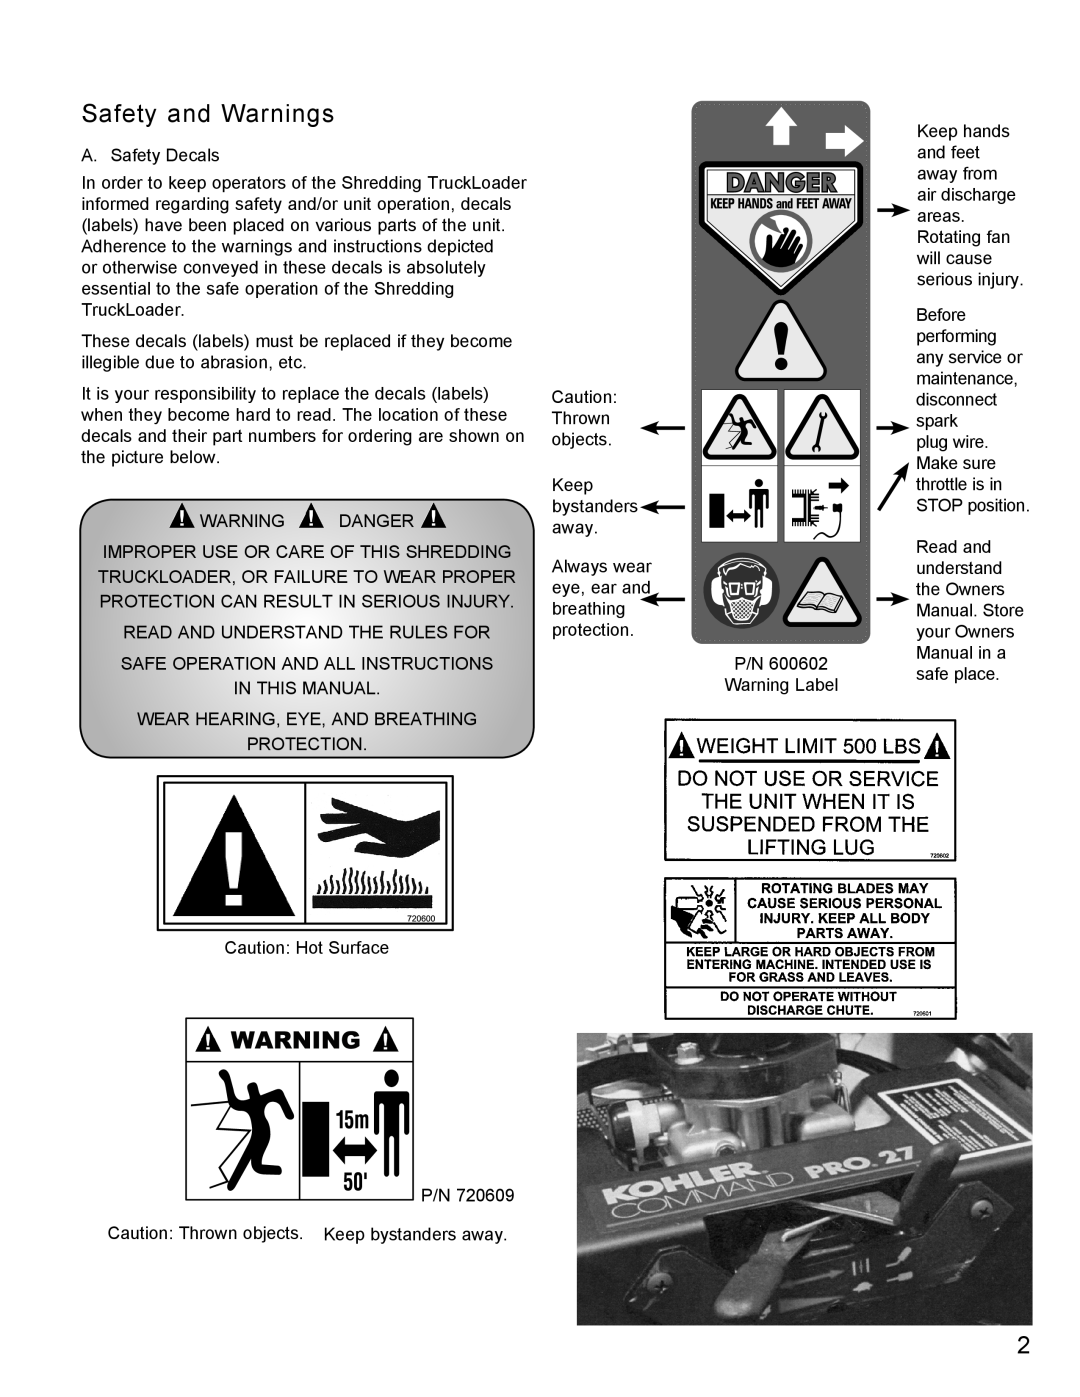 Little Wonder 8221, 8271 manual Safety and Warnings 